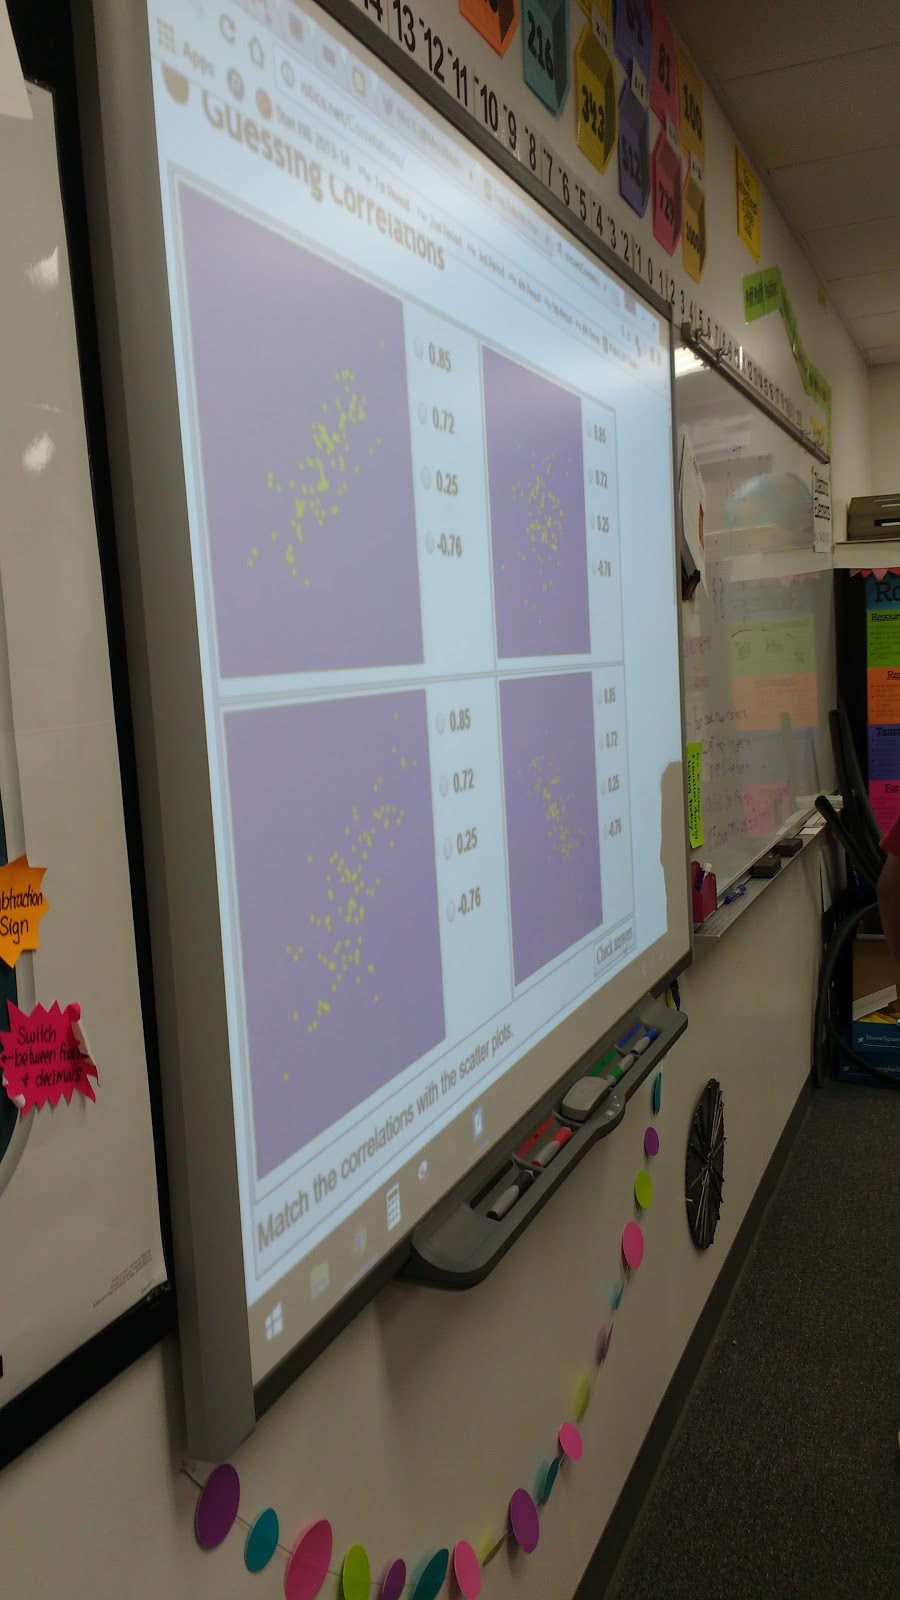 Istics Guessing Correlation Coefficient Game projected on smartboard. 